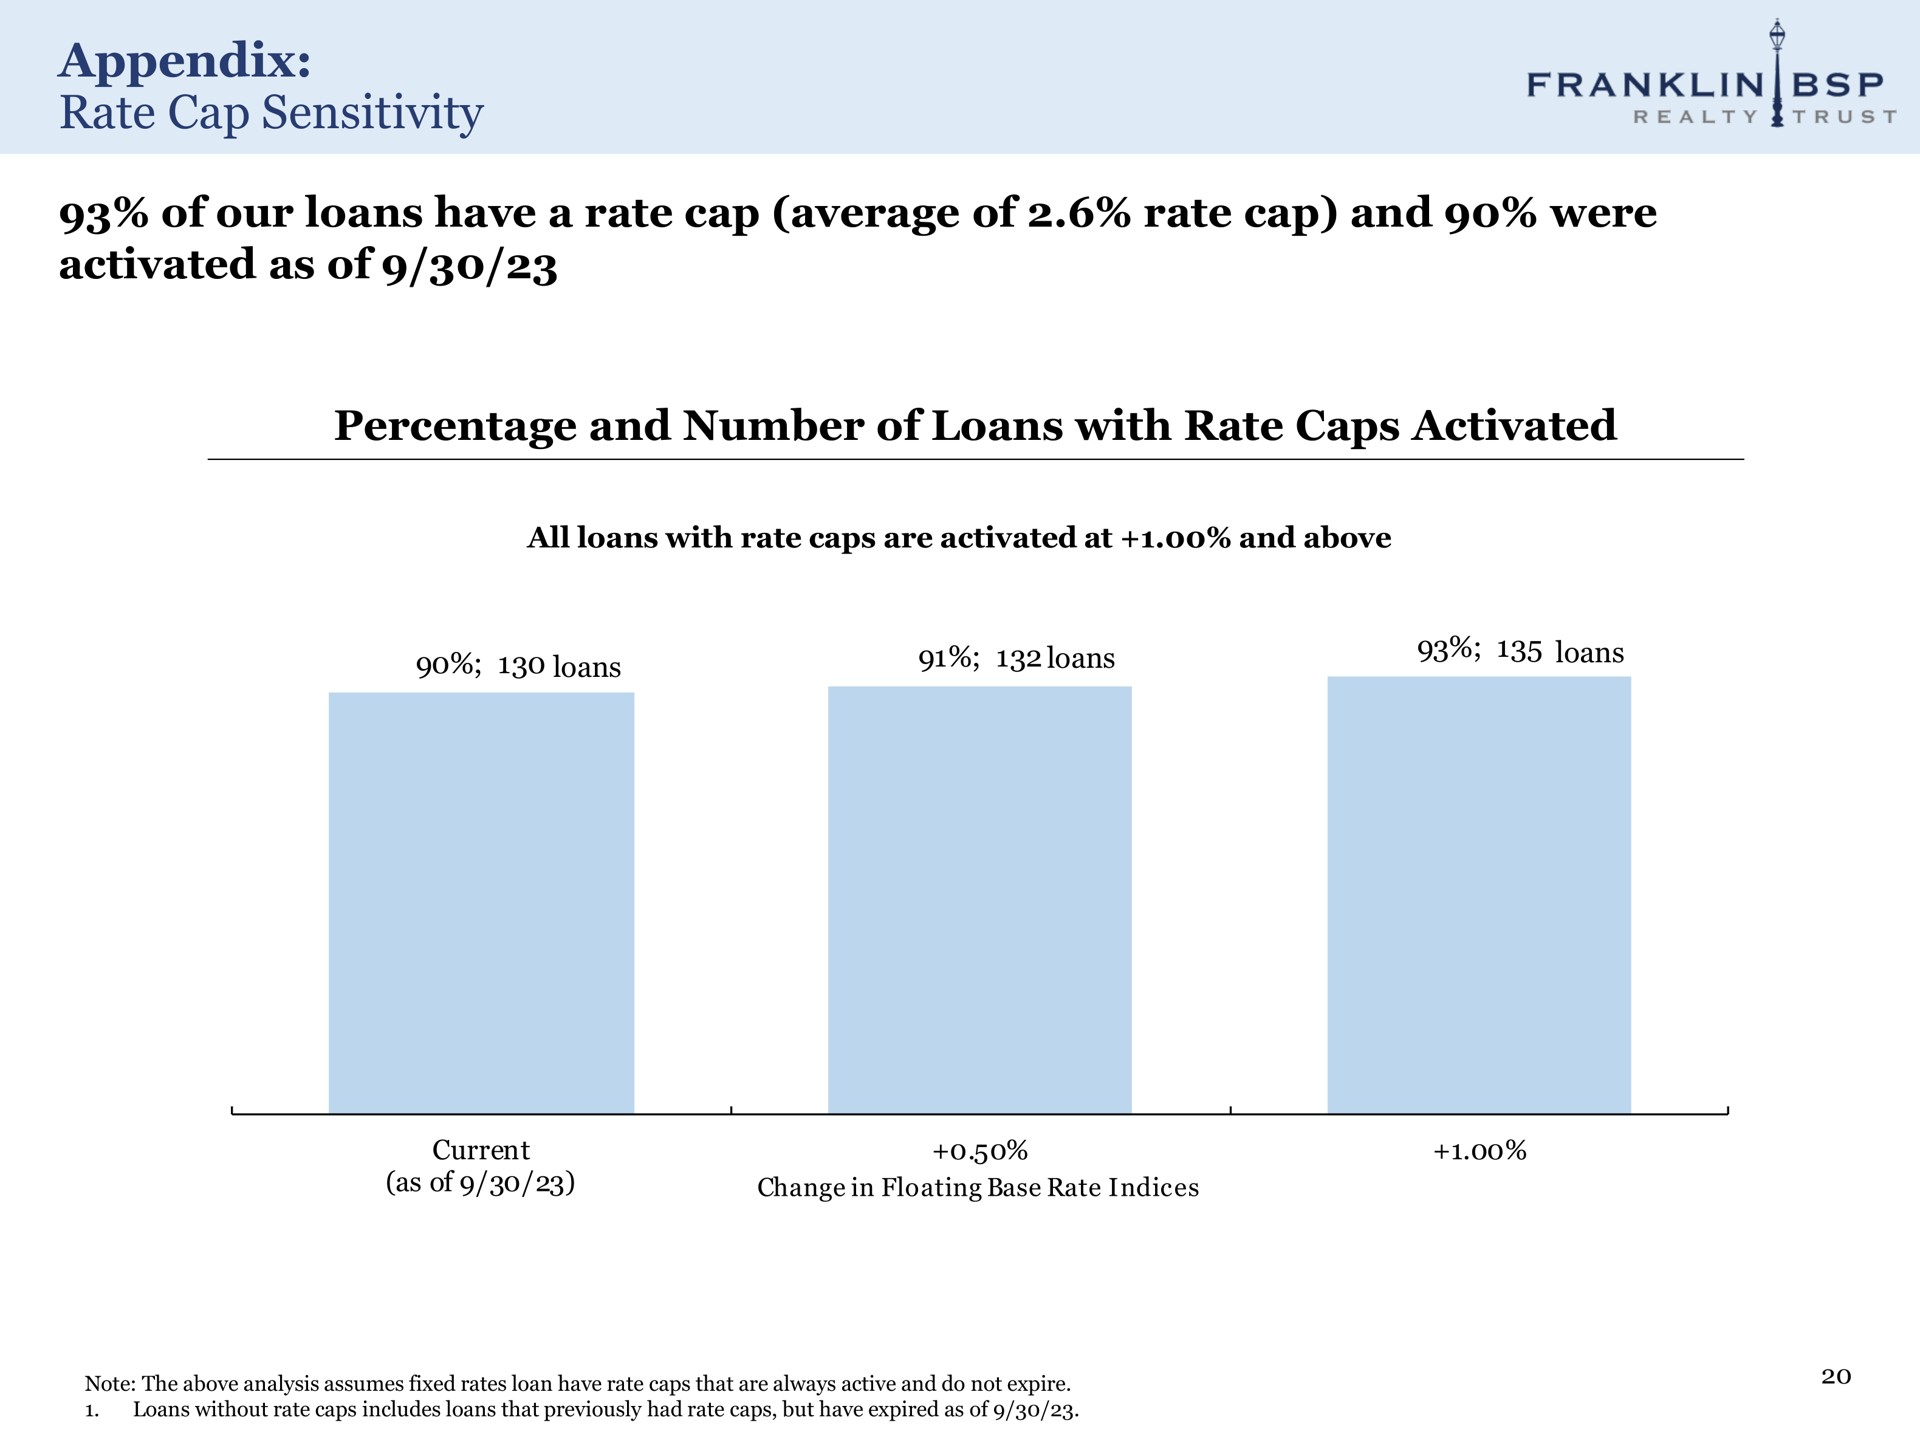 appendix rate cap sensitivity of our loans have a rate cap average of rate cap and were activated as of percentage and number of loans with rate caps activated pee franklin | Franklin BSP Realty Trust